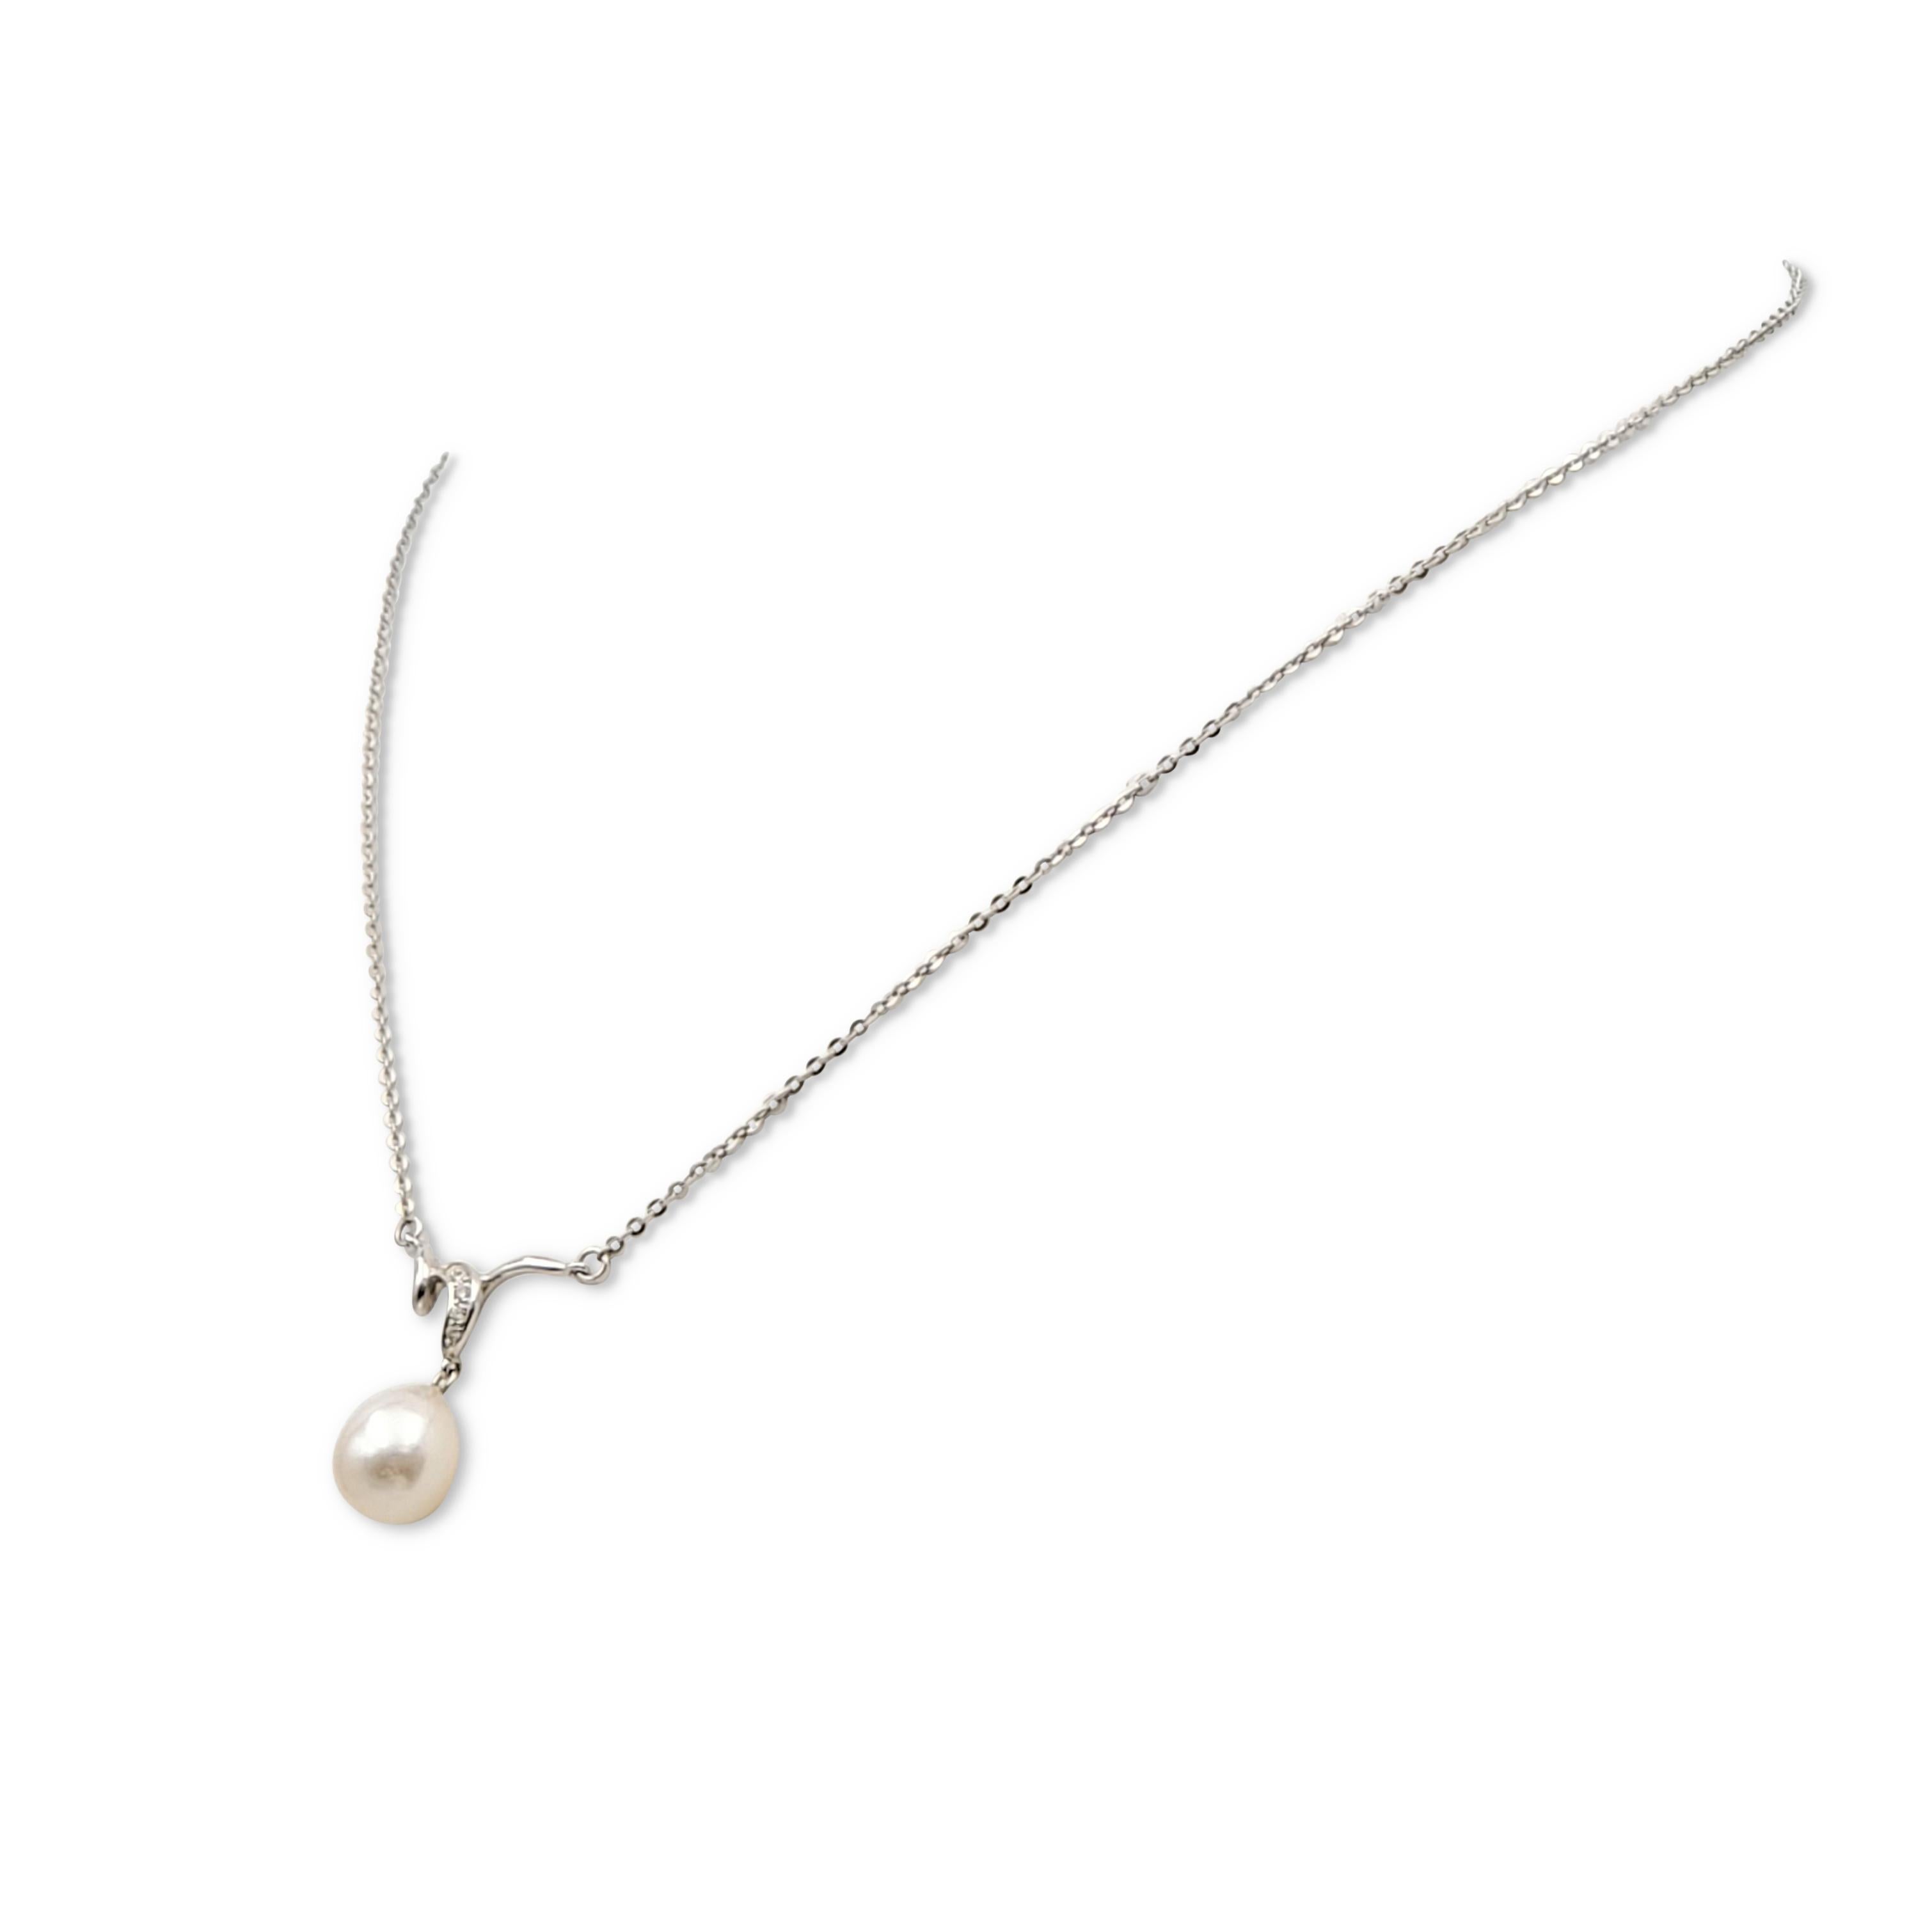 Authentic Mikimoto pendant necklace crafted in 18 karat white gold featuring one Akoya pearl drop measuring 10.5 mm which is accented by high-quality (E-F color, VS) round brilliant cut diamonds weighing an estimated 0.05 cttw. Signed M, 750. The